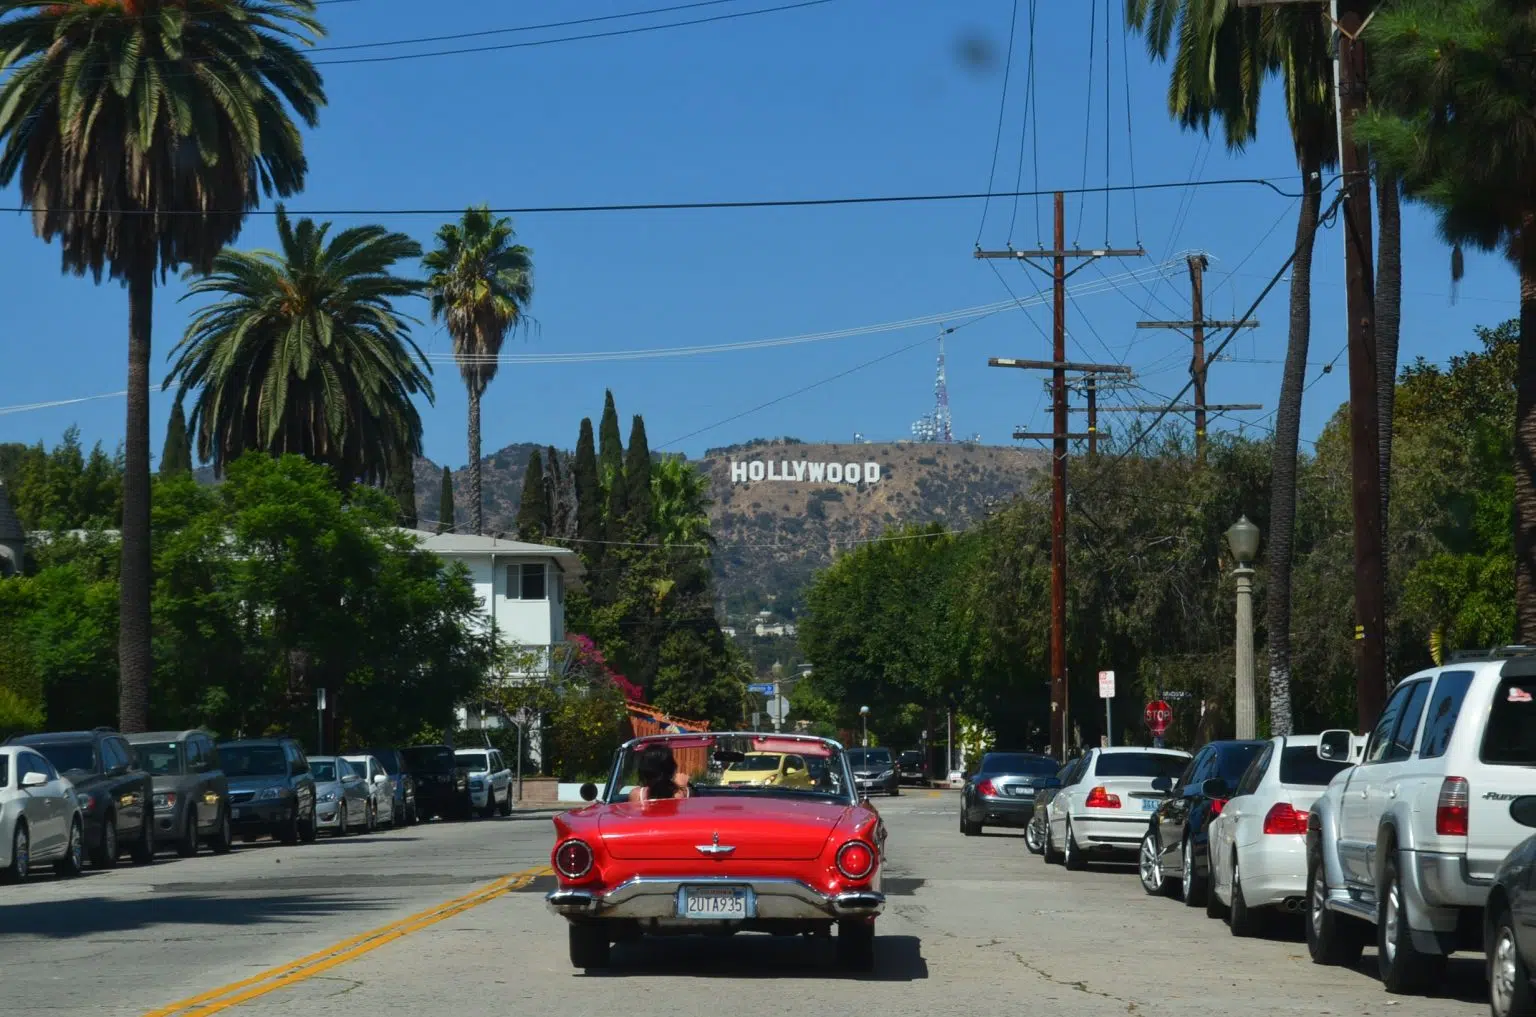 A car on the road with the Hollywood sign in front of it.